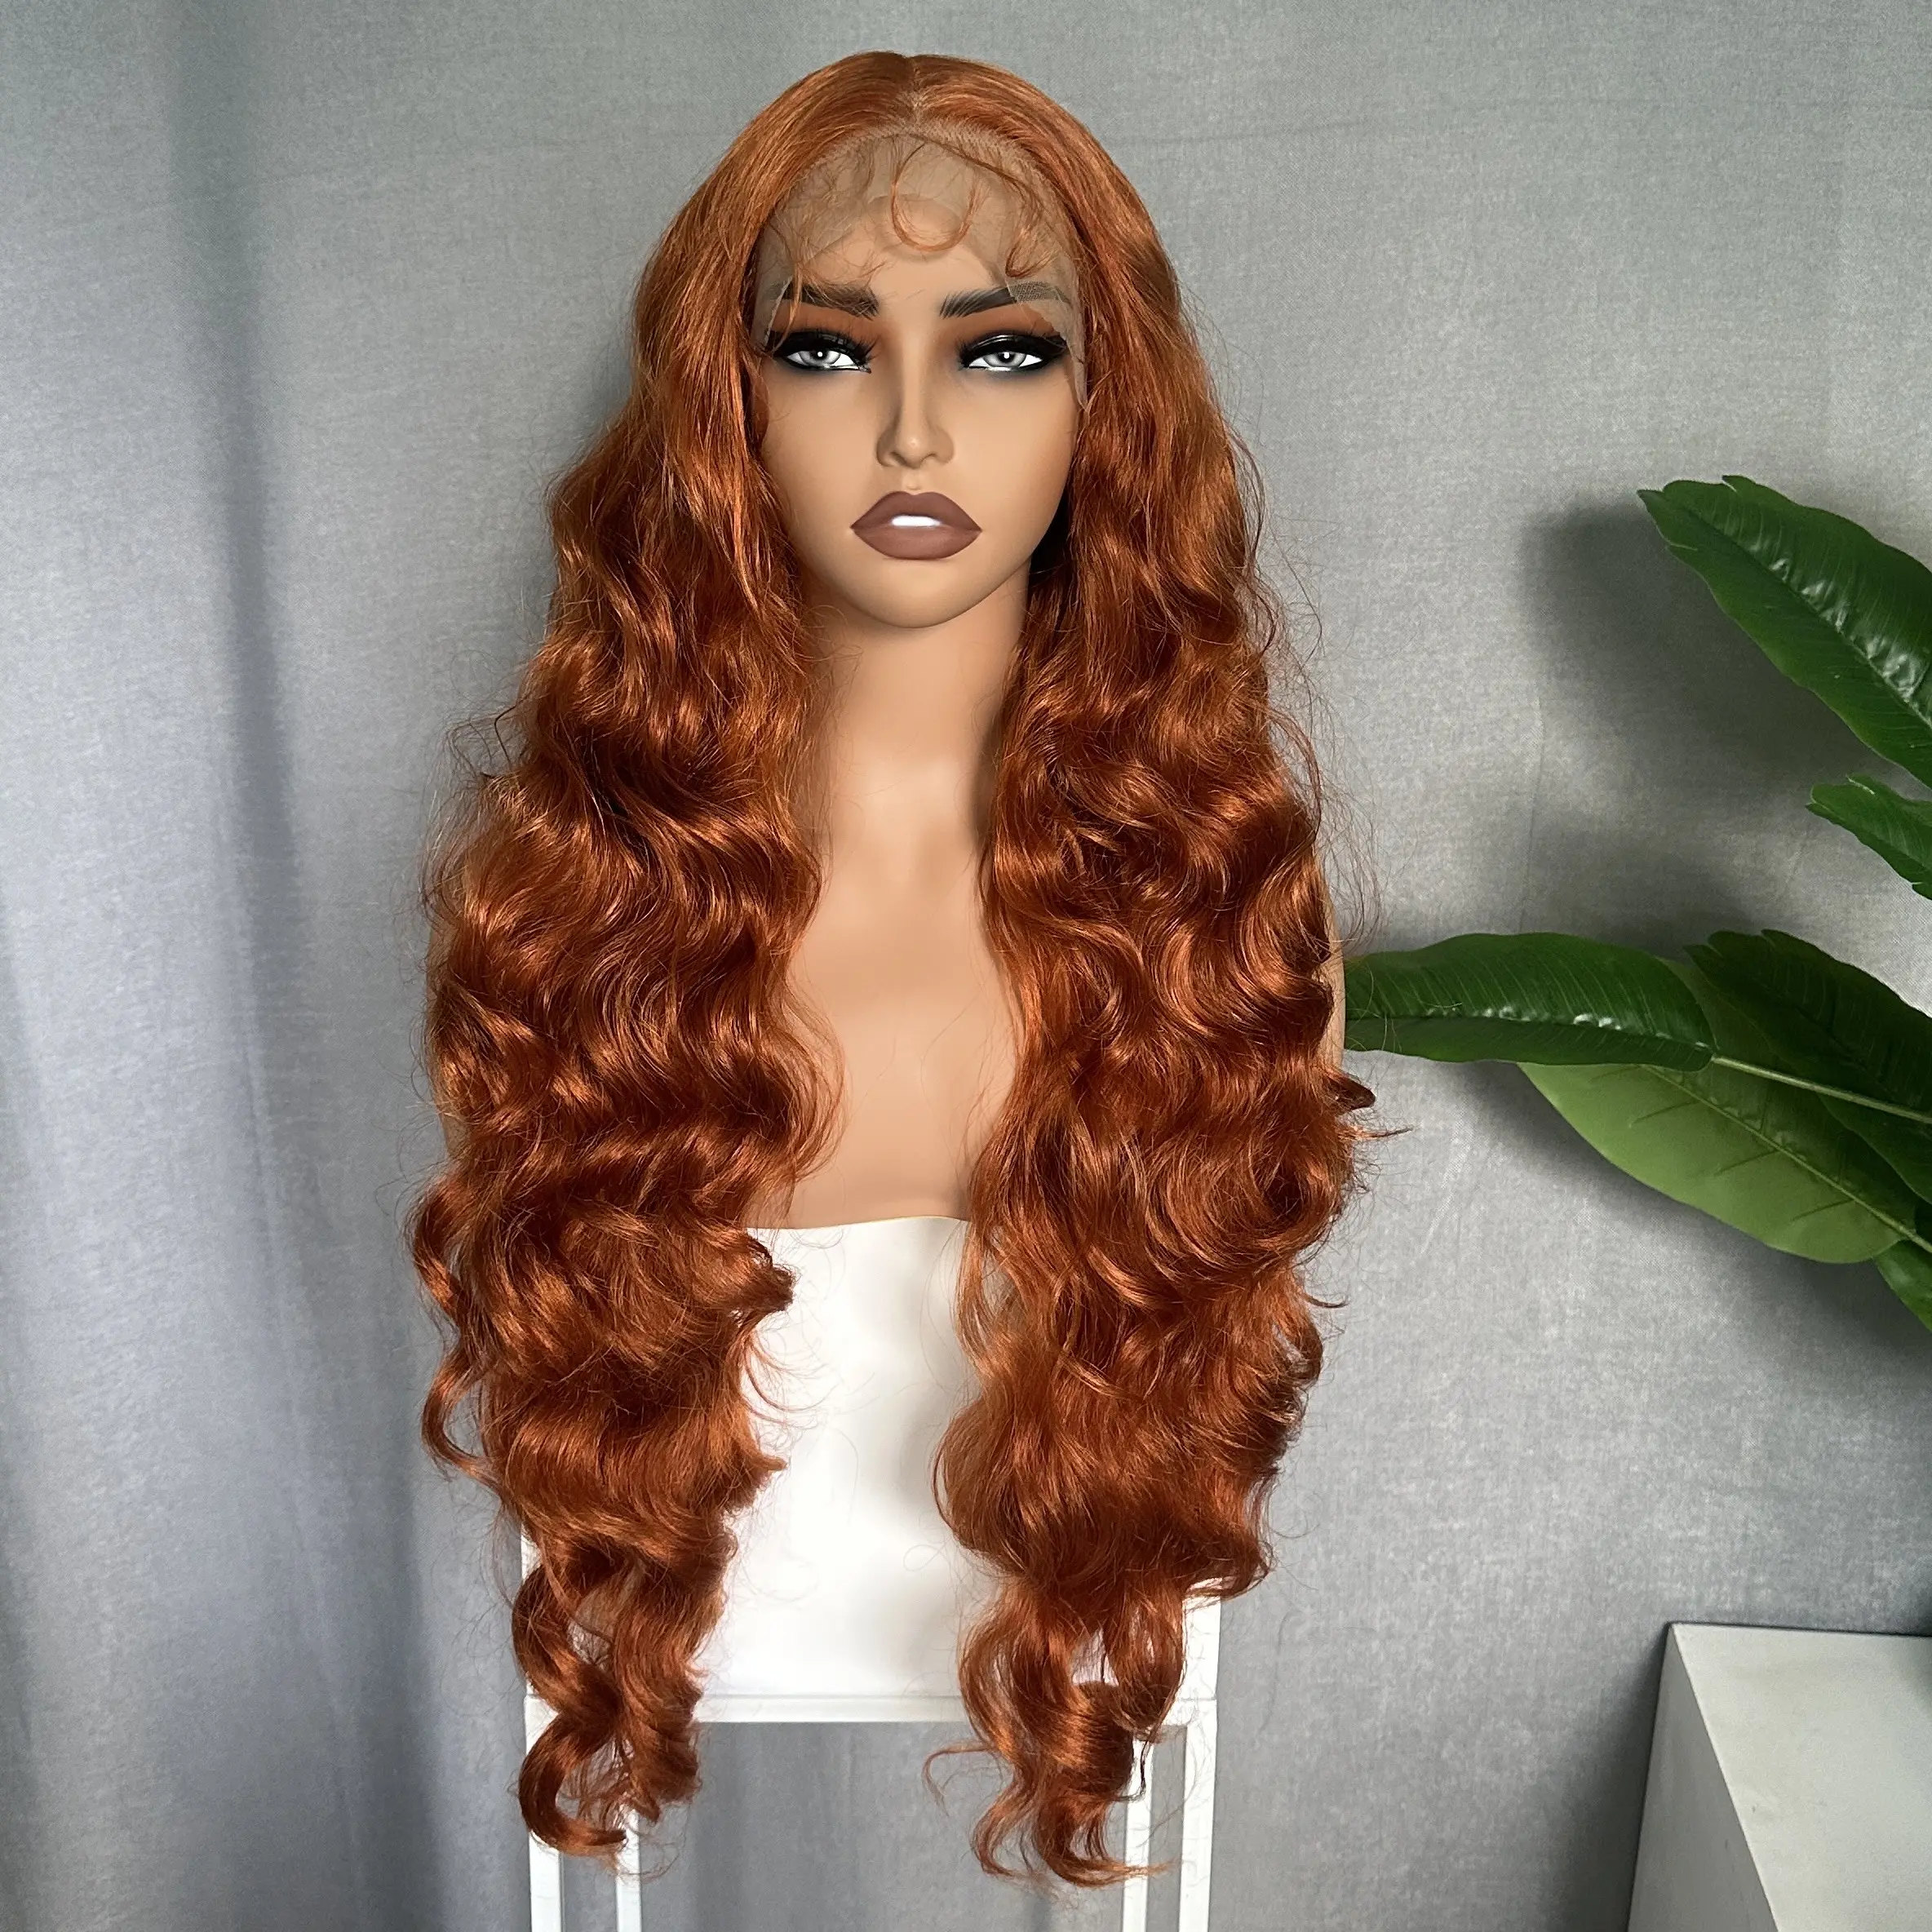 X-TRESS 32Inch Long 13x6 Lace Body Wave Pre Plucked with Baby Hair Glueless Swiss Lace Heat Resistant Synthetic Lace Front Wigs